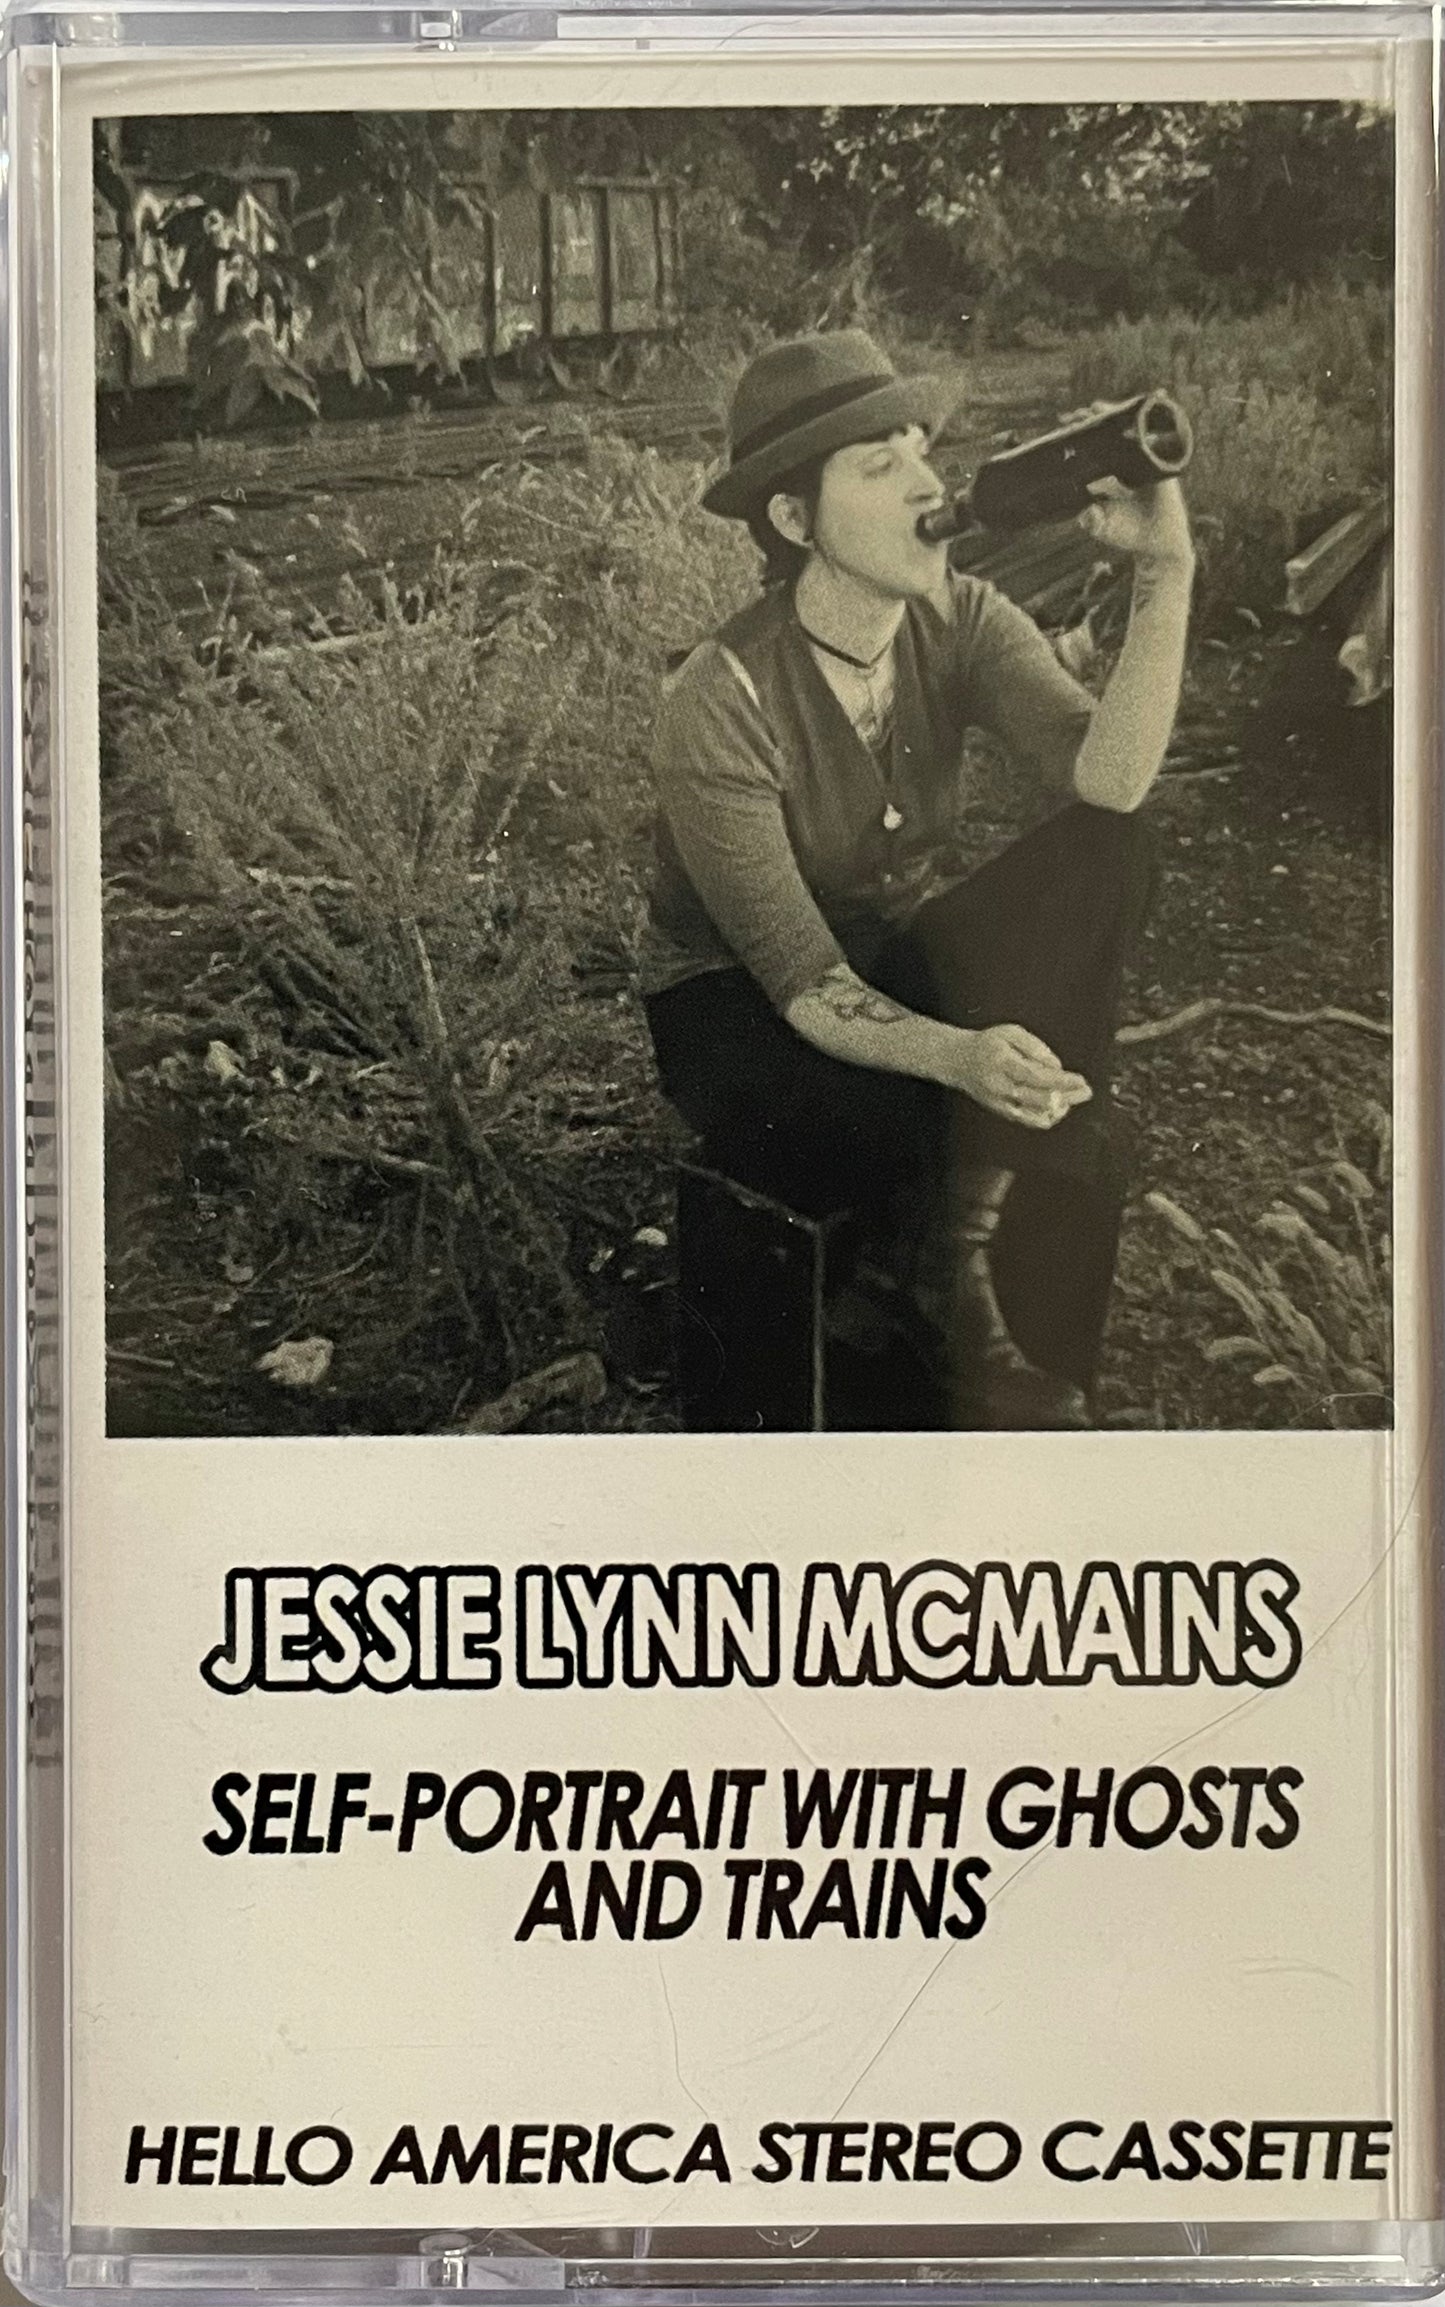 Self-Portrait with Ghosts and Trains, Jessie Lynn McMains